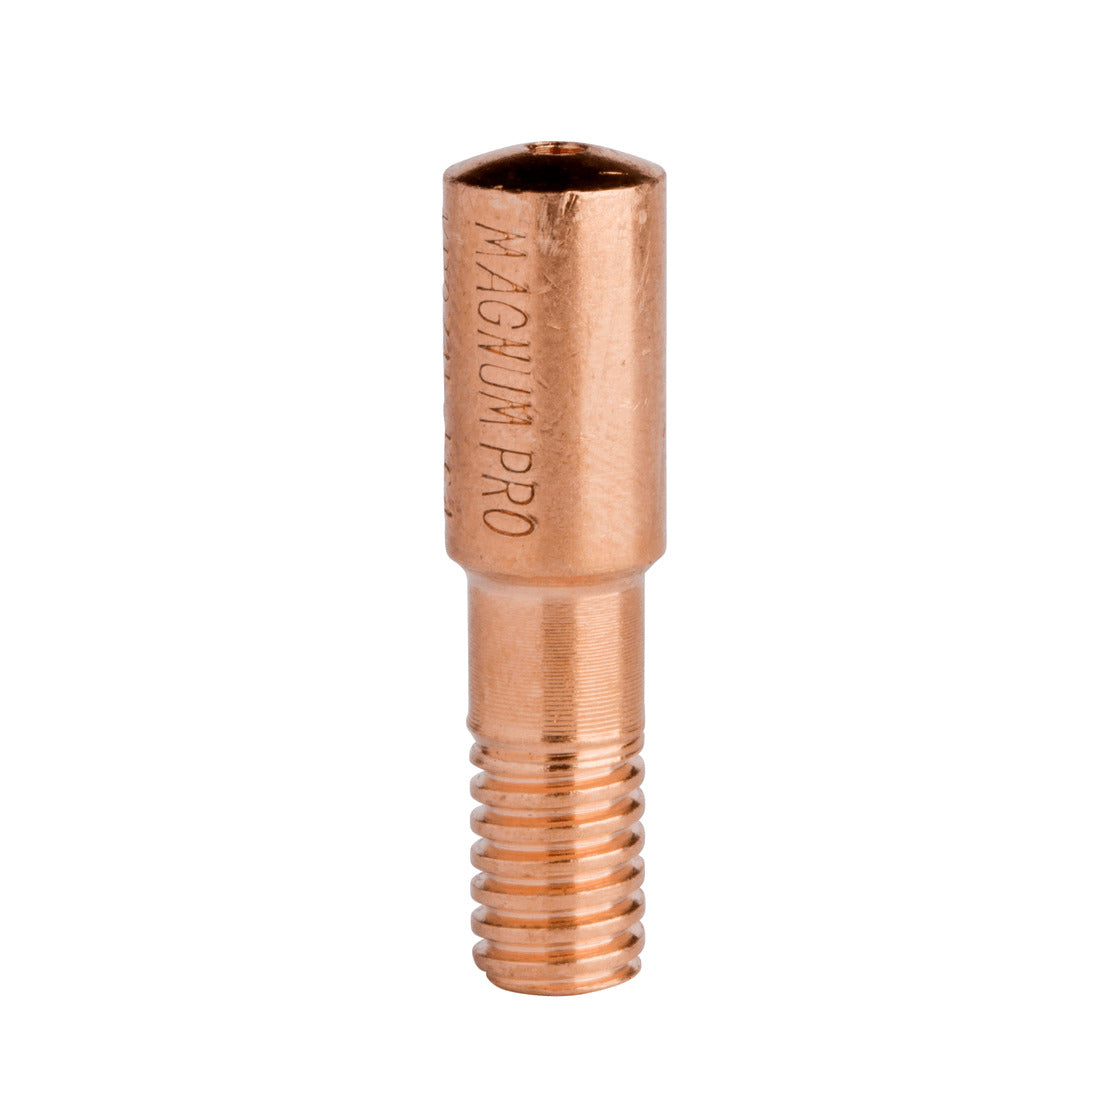 Lincoln Copper Plus Contact Tip - 550A, Standard, 1/16 in (1.6 mm) - 10/pack (KP2745-116)